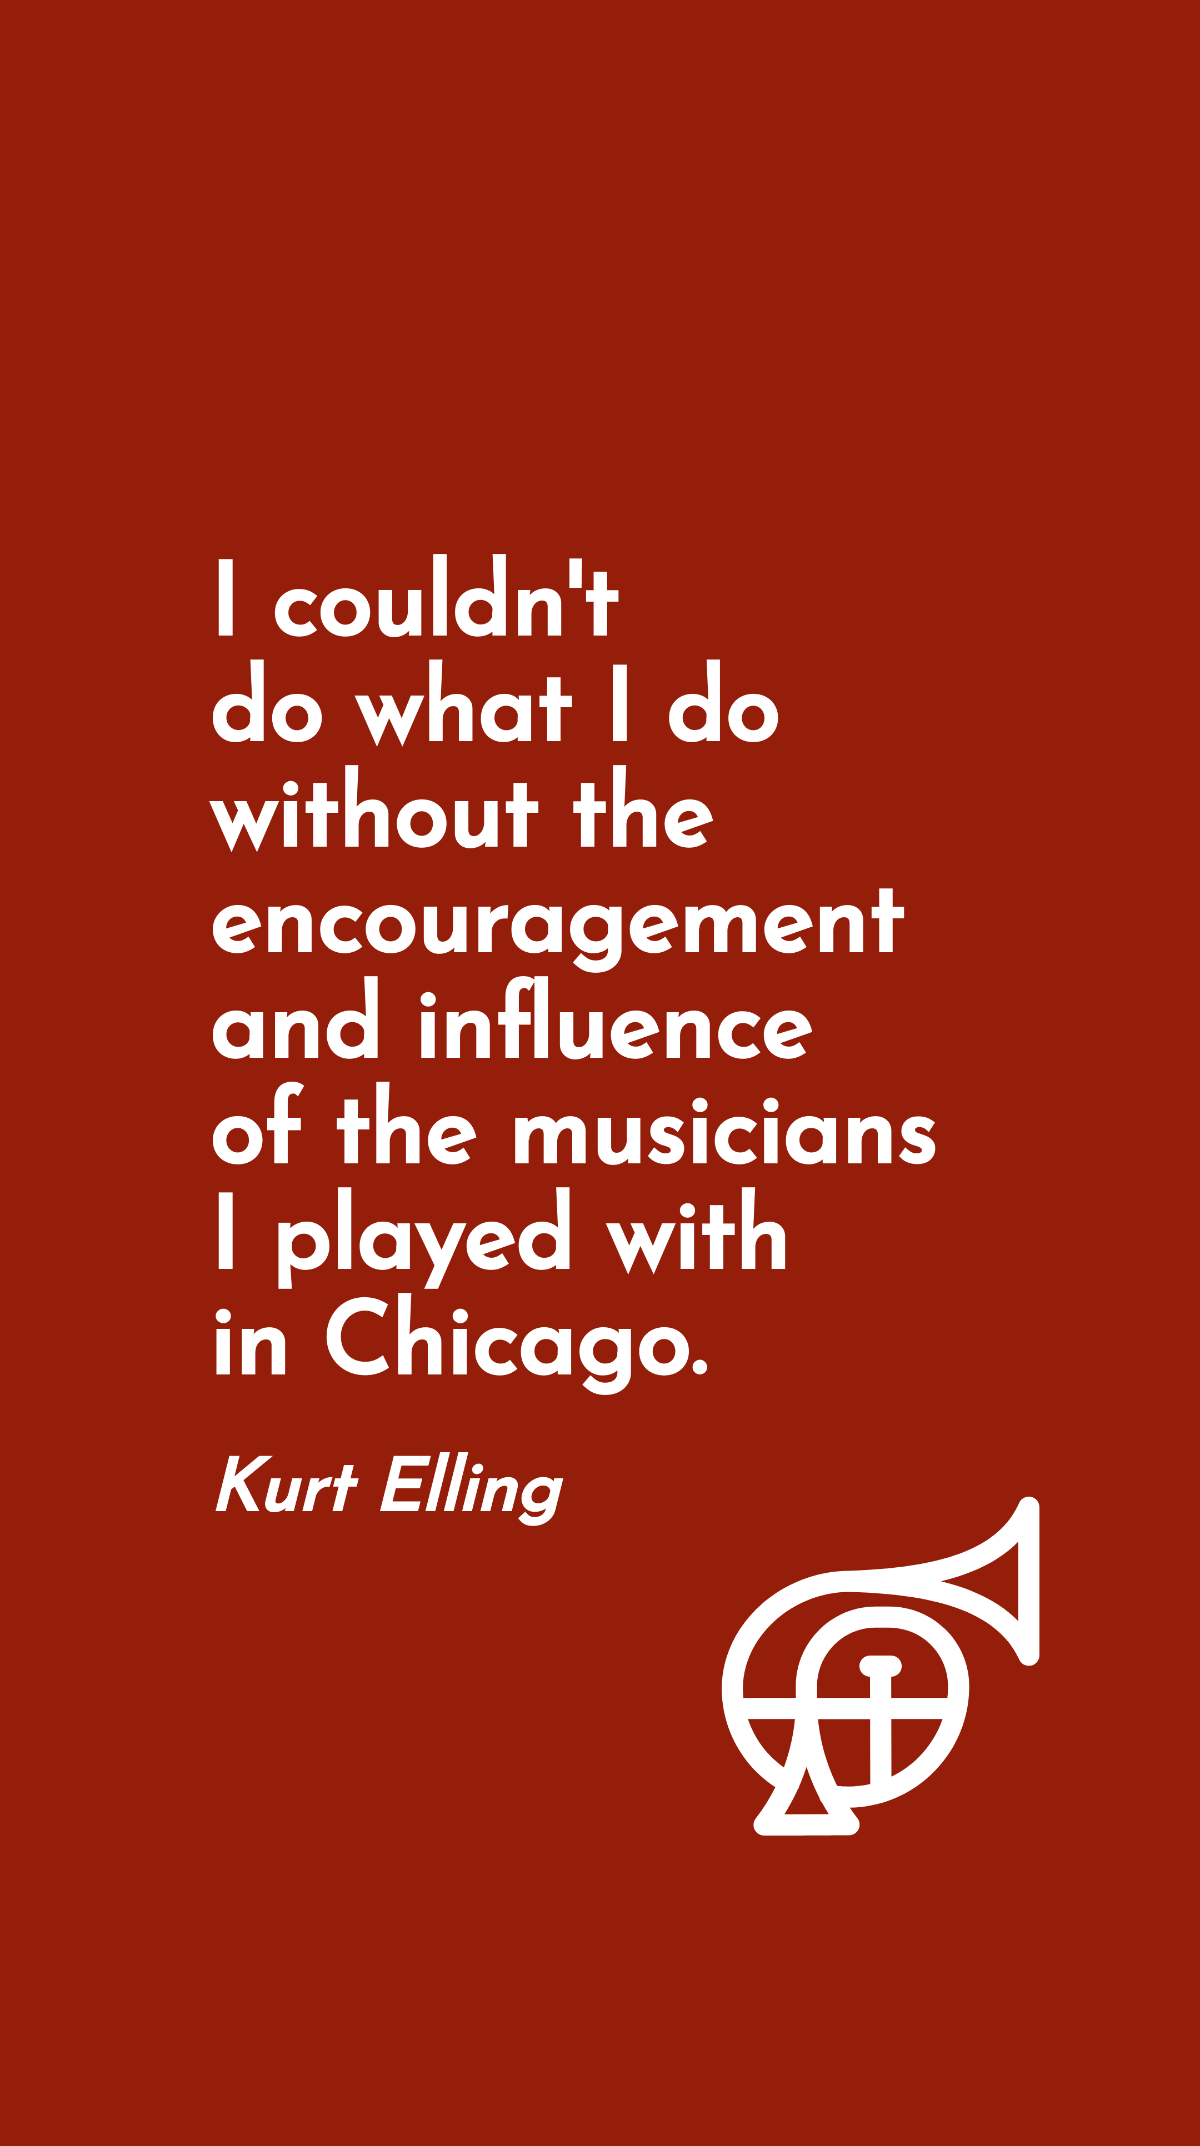 Free Kurt Elling - I couldn't do what I do without the encouragement and influence of the musicians I played with in Chicago. Template